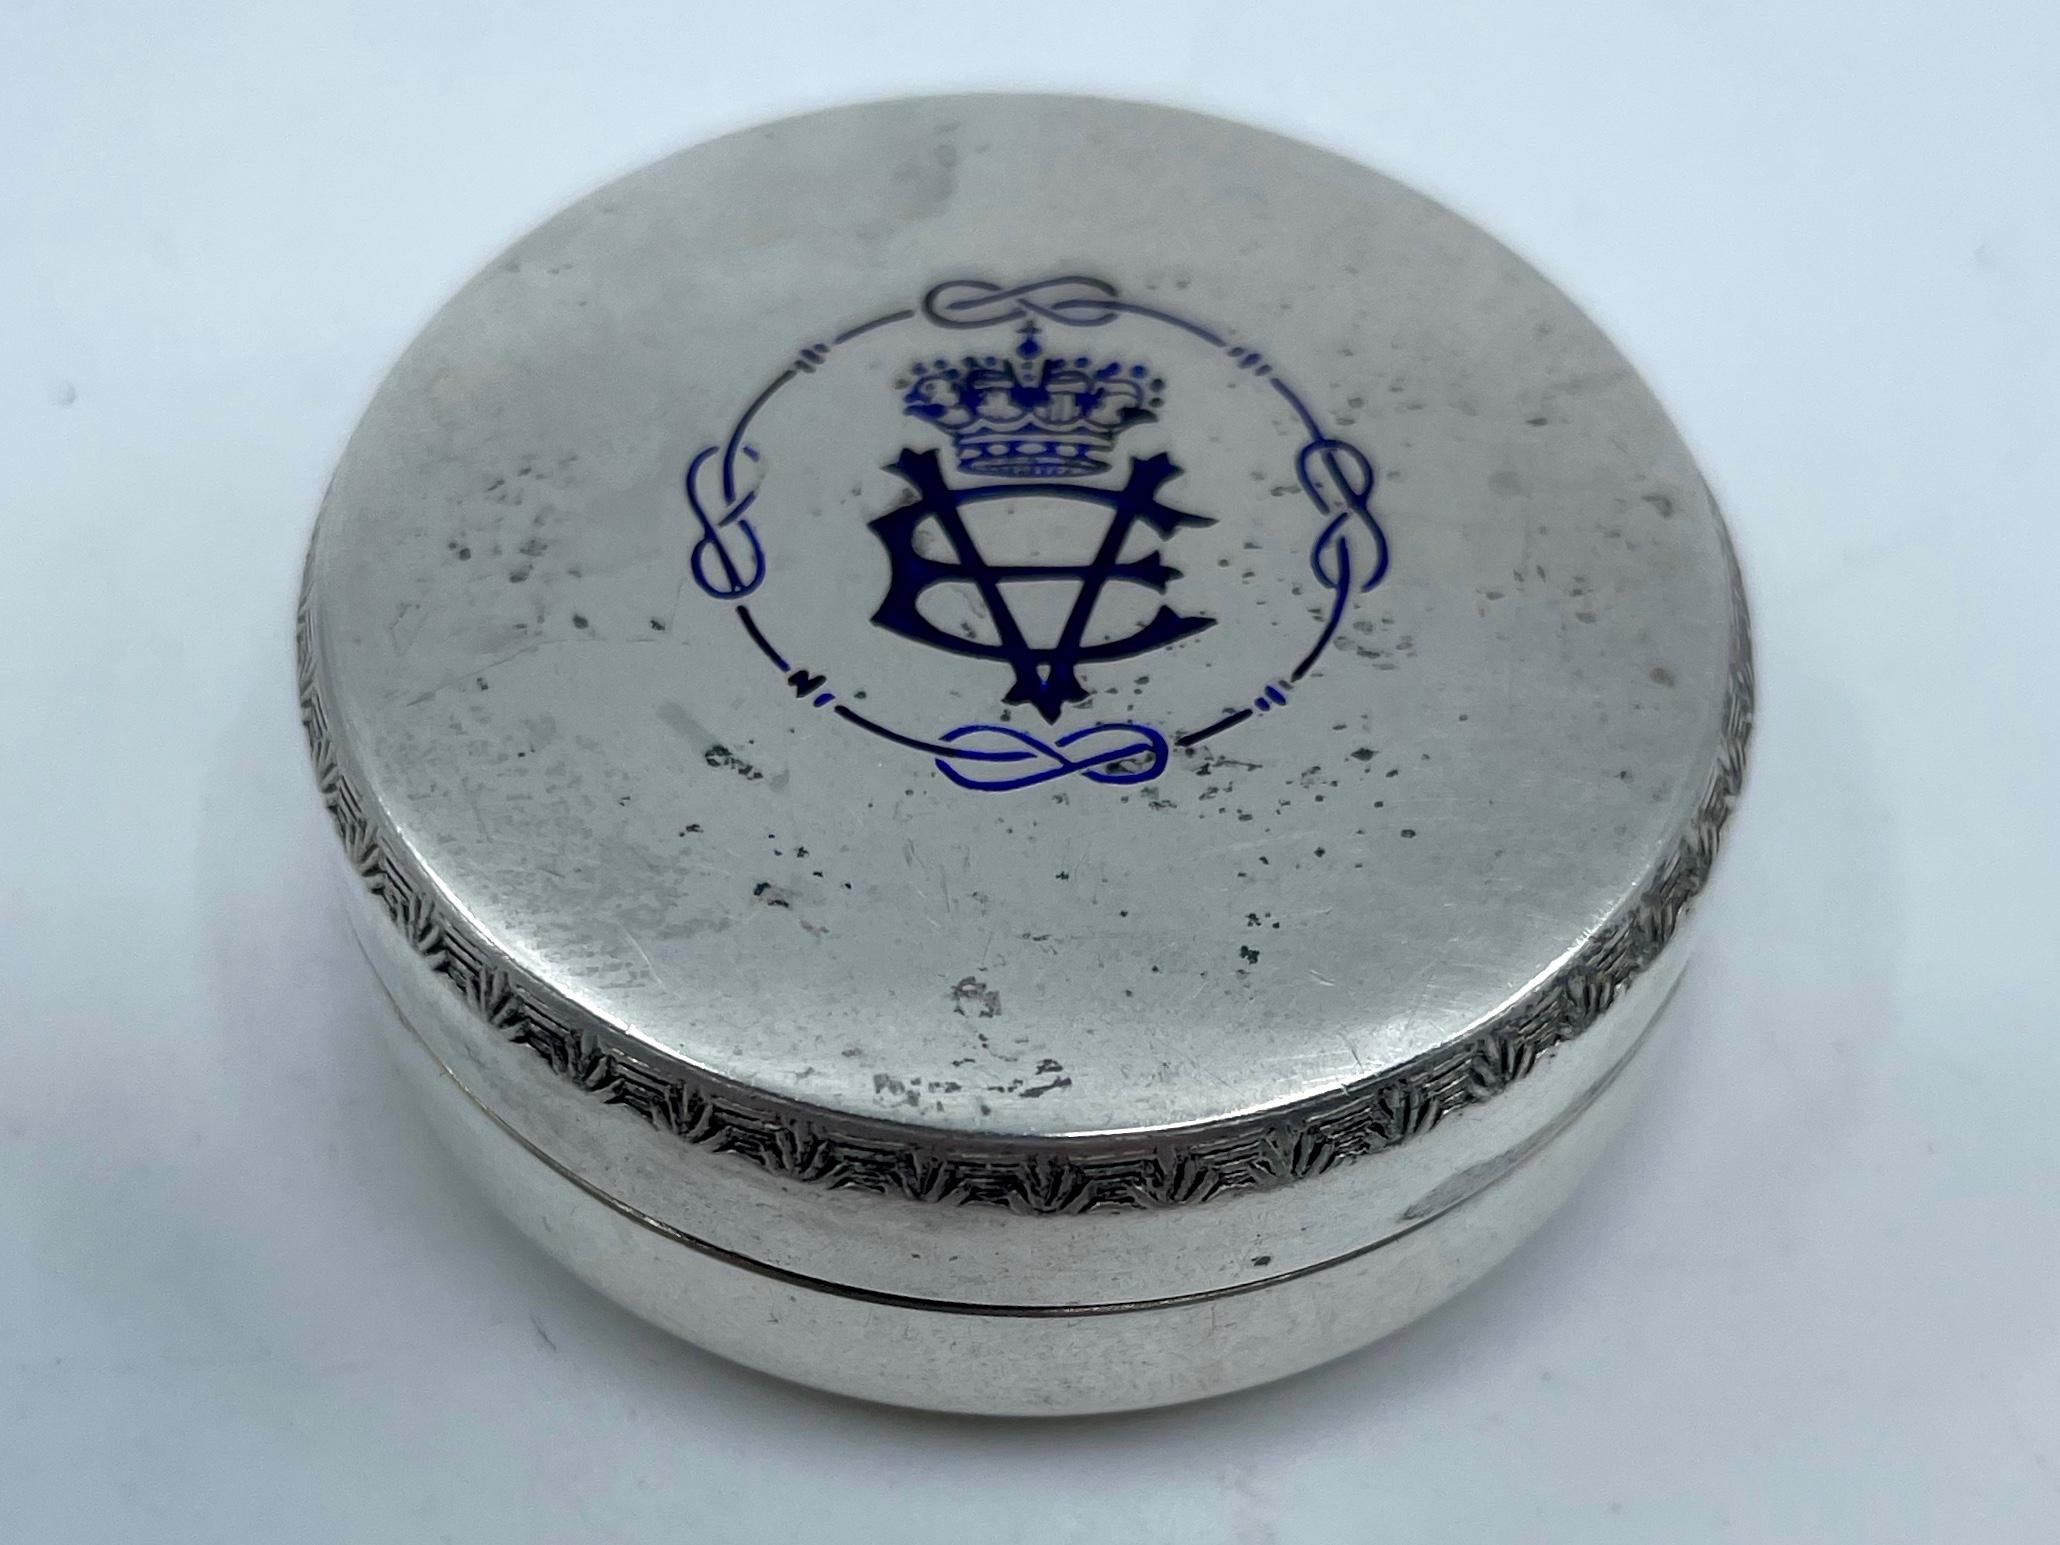 Sterling silver Victor Emanuel pill box. Antique blue enameled silver pill box with the crowned initials of King Victor Emanuel and House of Savoy rope emblem, stamped Masenza Rome. Early 20th century
Dimensions: 1.63” Diameter x .63